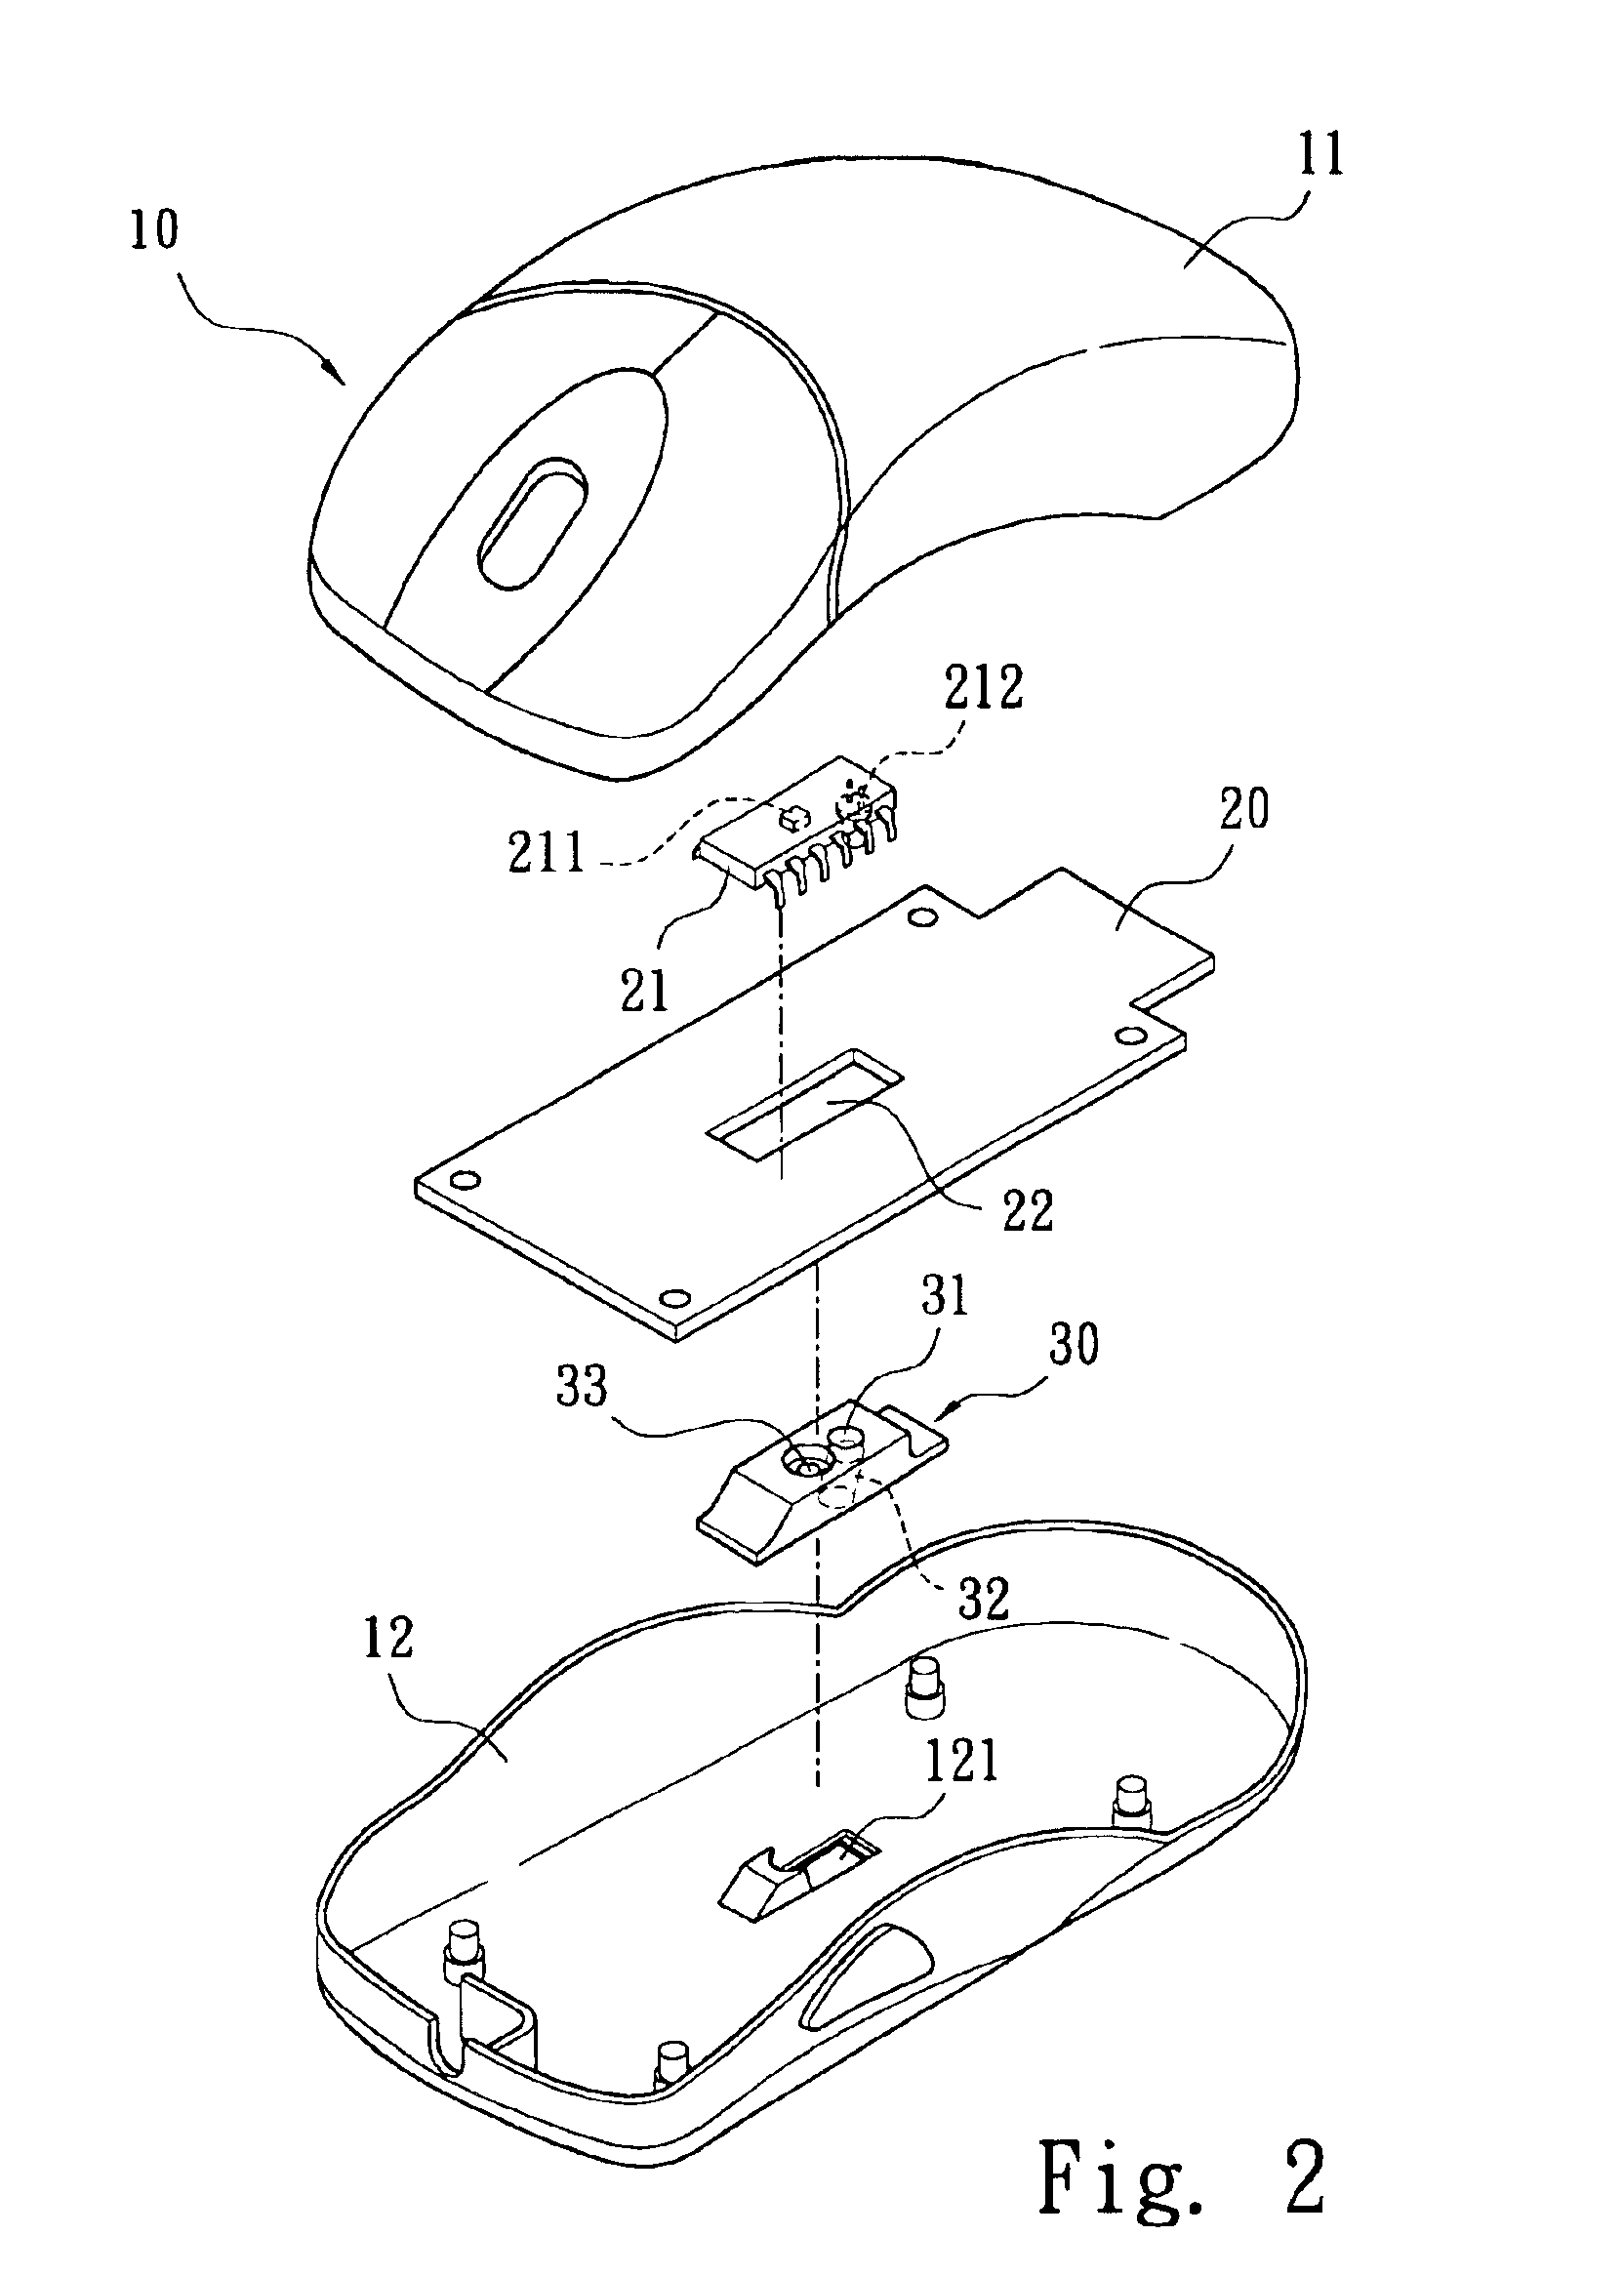 Optical mouse with uniform light projection